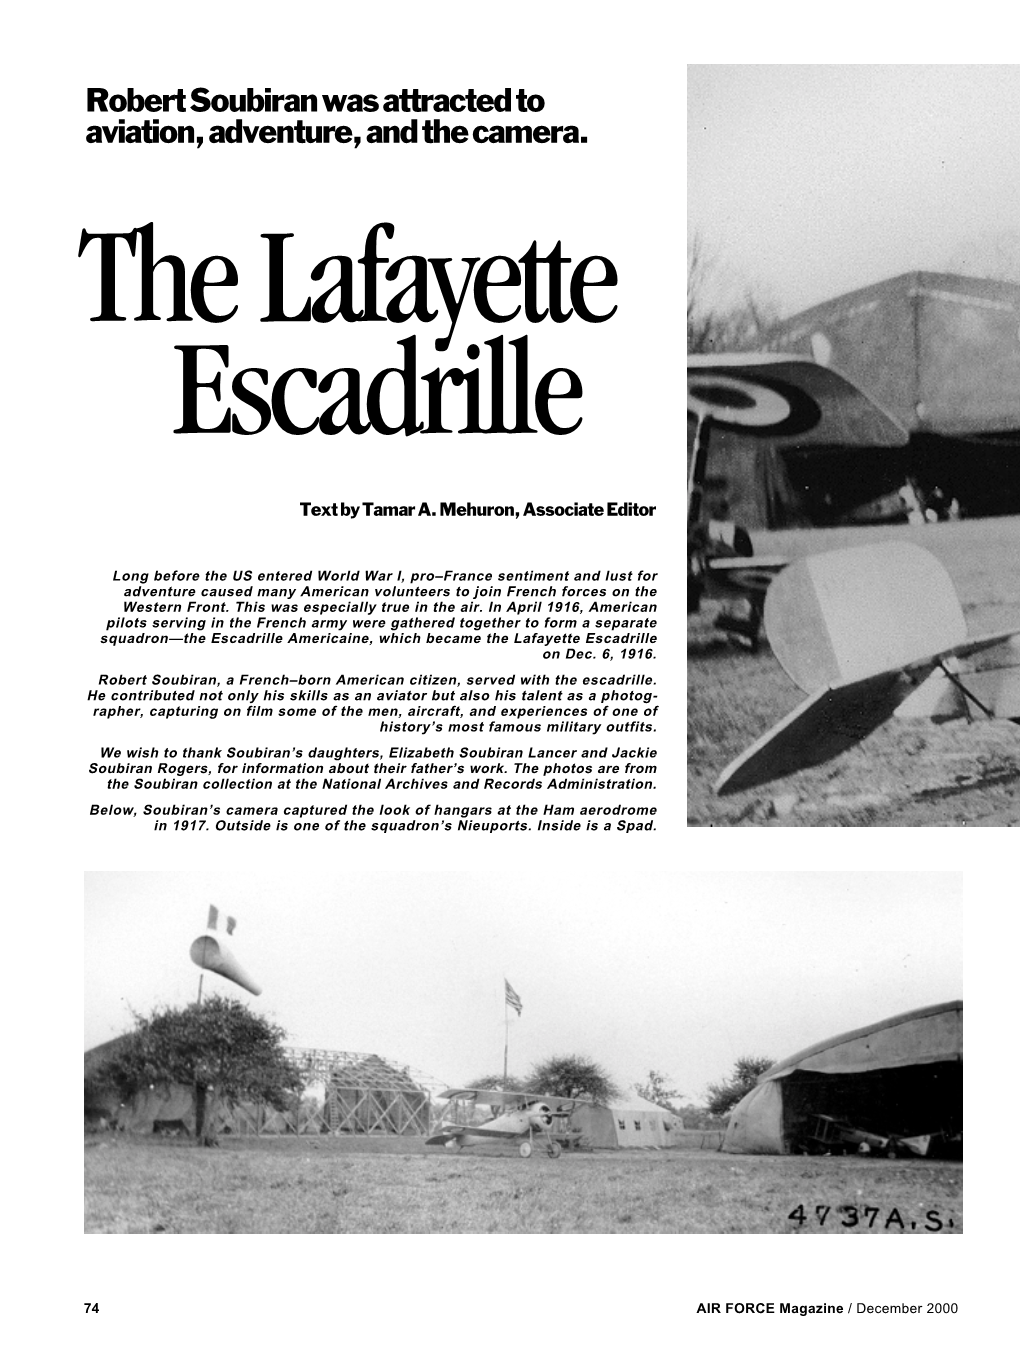 Robert Soubiran Was Attracted to Aviation, Adventure, and the Camera. the Lafayette Escadrille